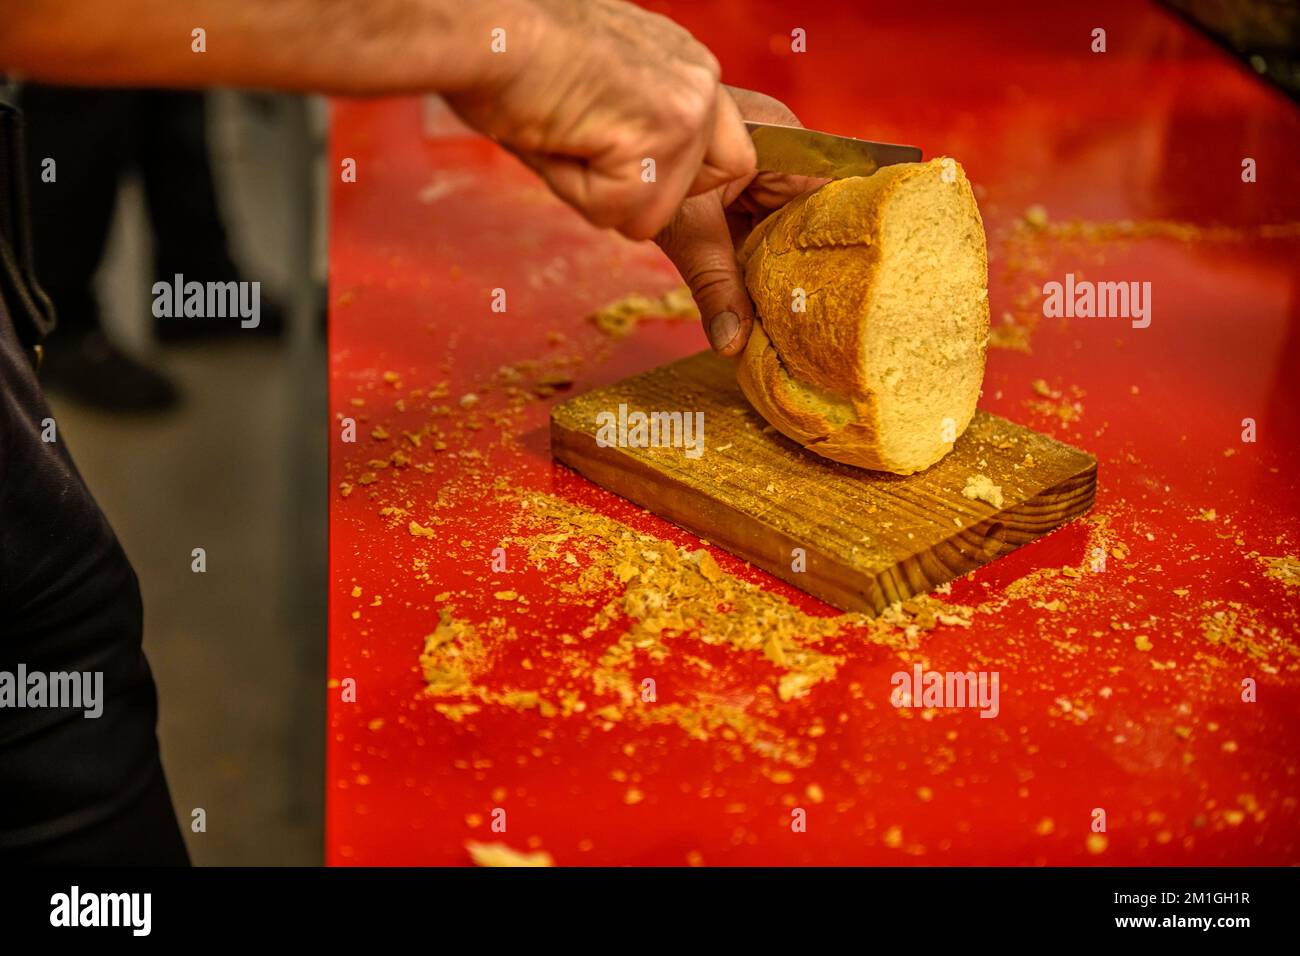 Cut a loaf of bread into smaller portions Stock Photo